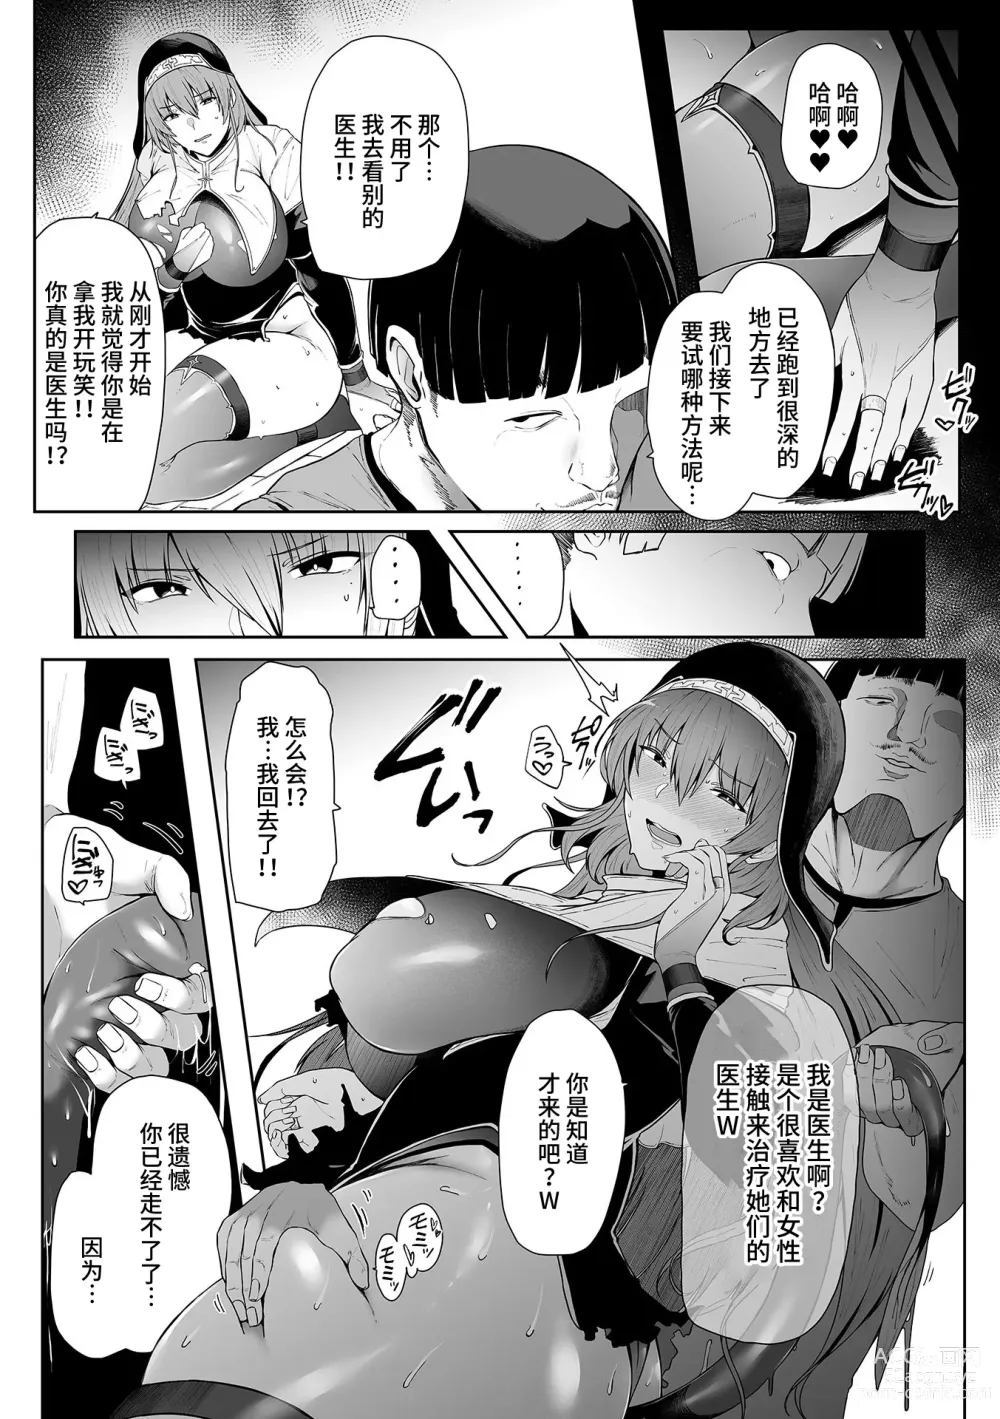 Page 11 of manga 淫蟲の聖女